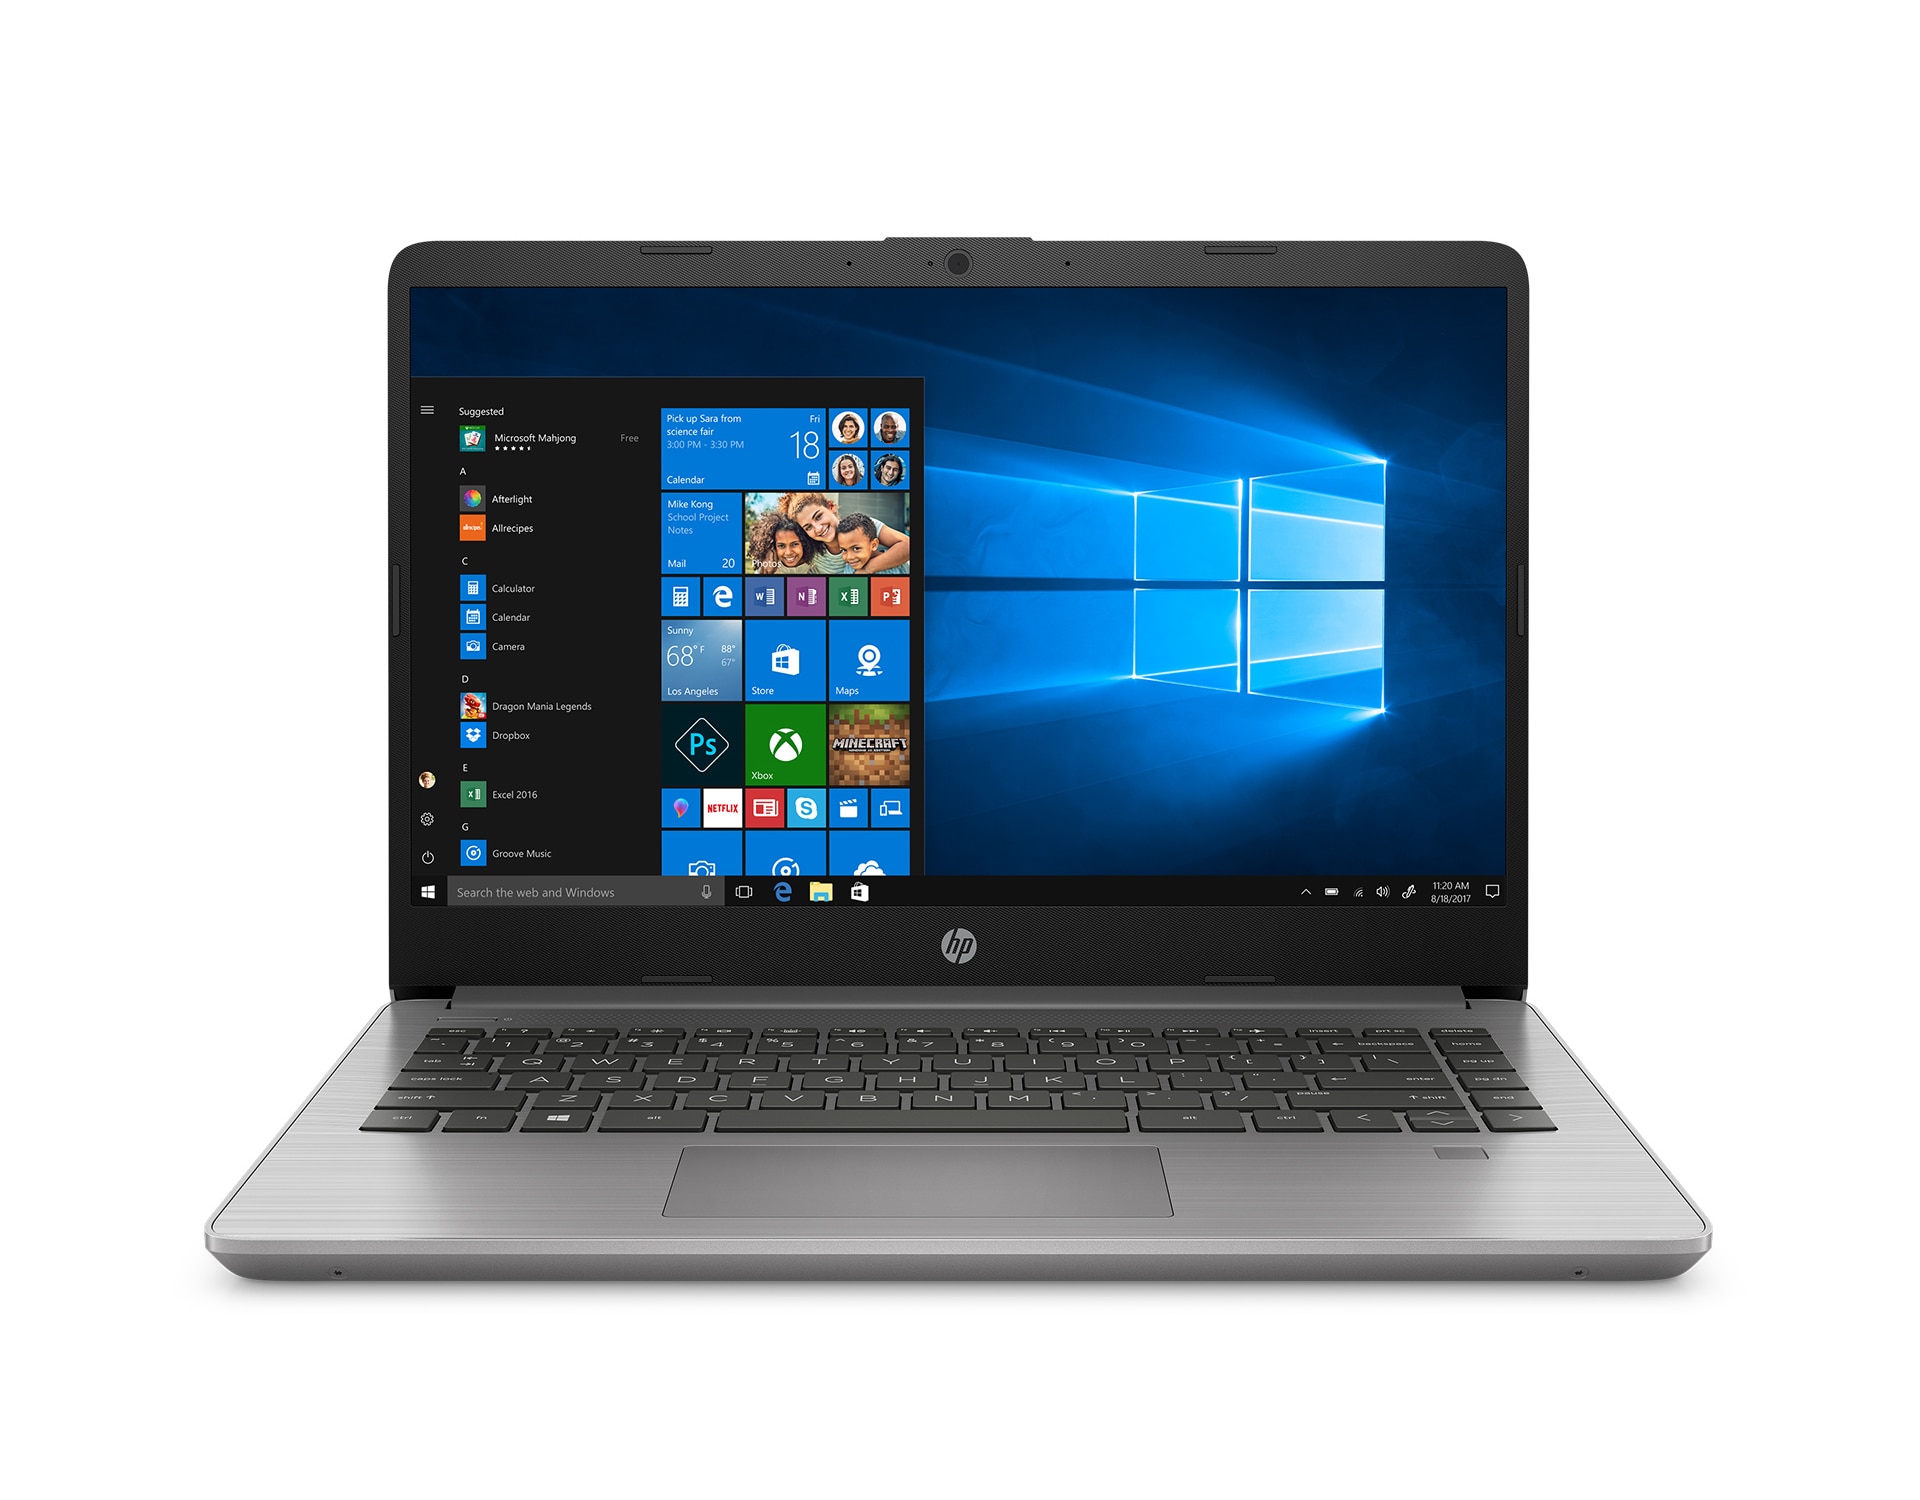 HP 340S G7 Notebook PC（9LY77PA・Core i3/4GB/128/HD） スタンダードモデル HP　BTO パソコン　格安通販